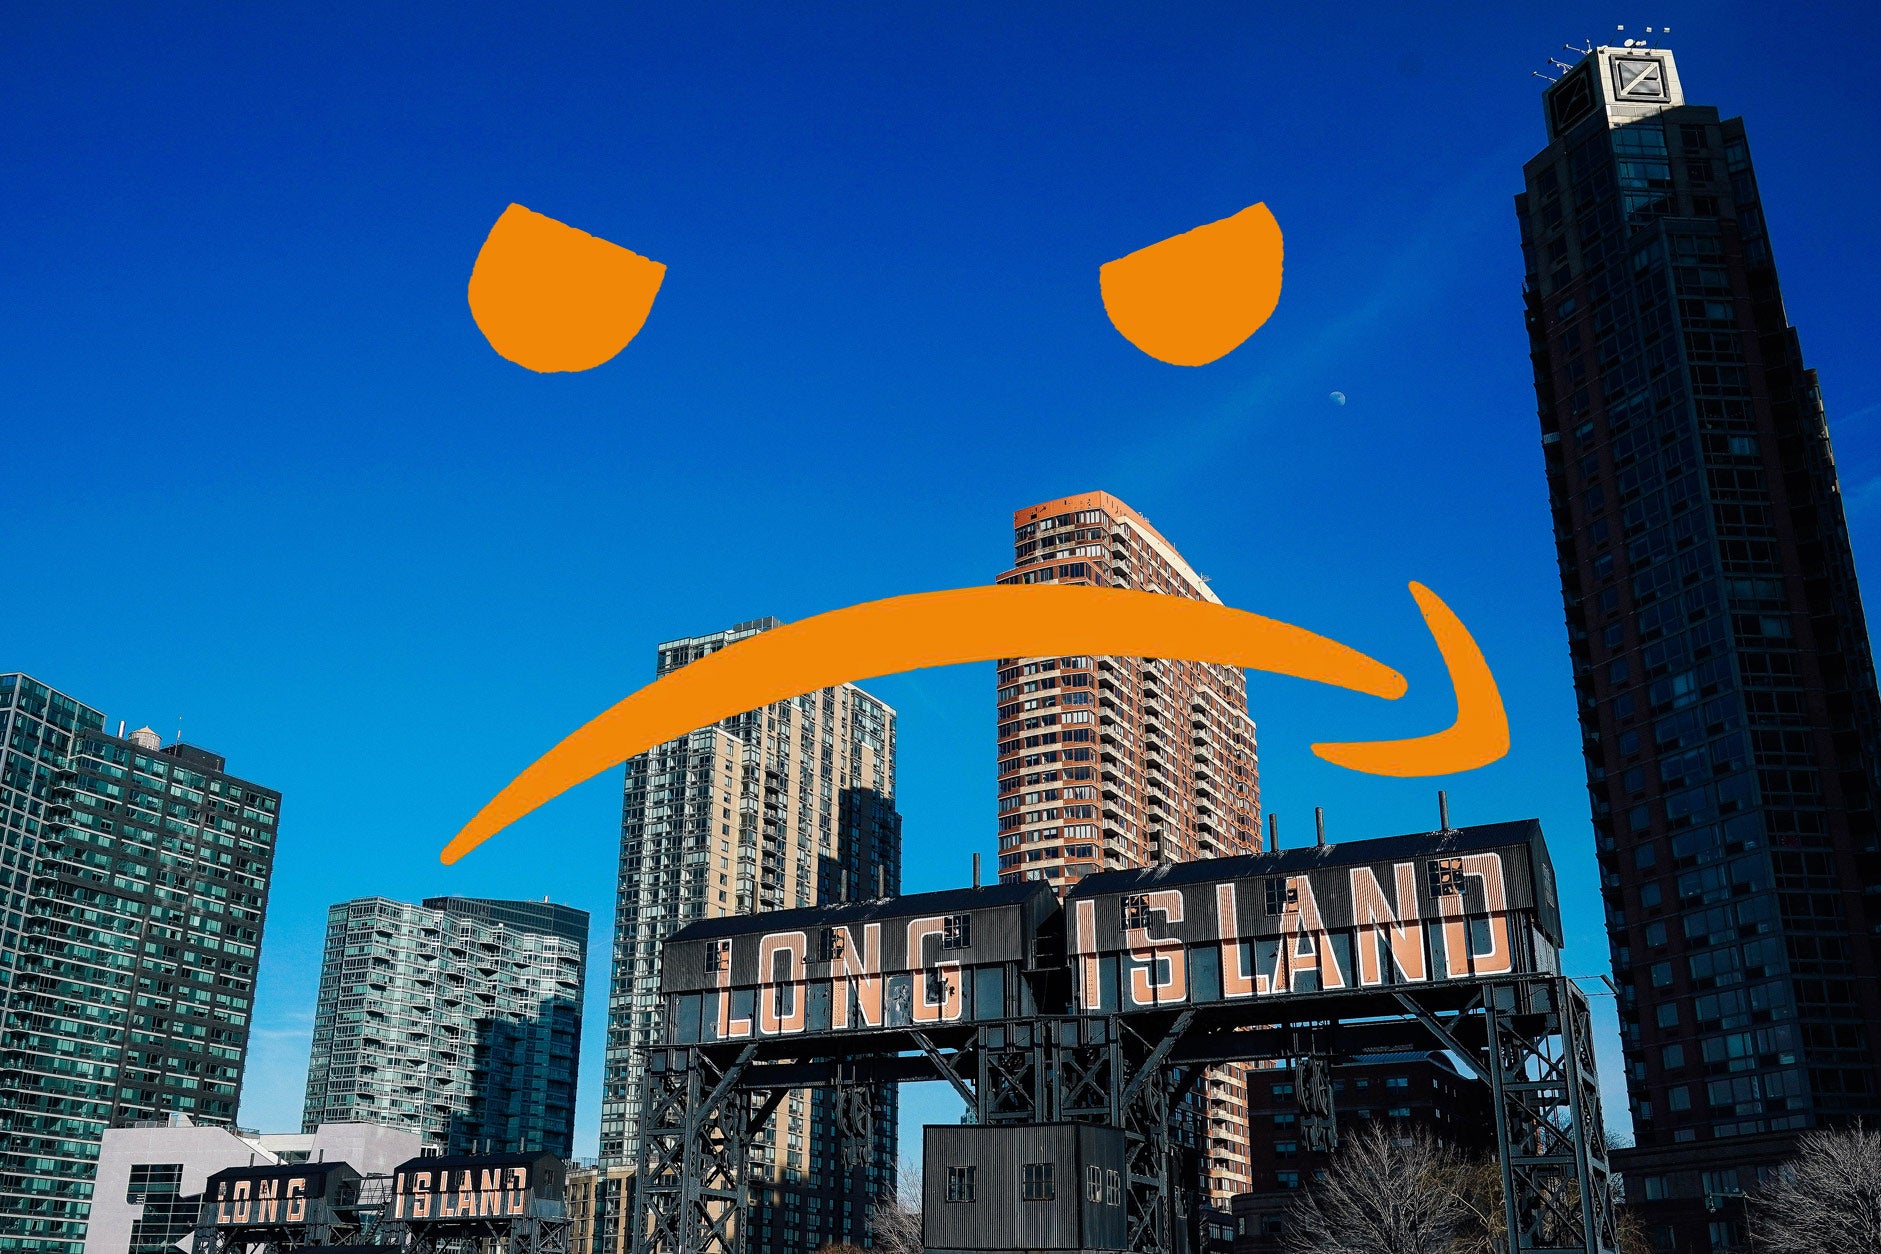 Amazon logo upside down to make a frown over an image of Long Island City